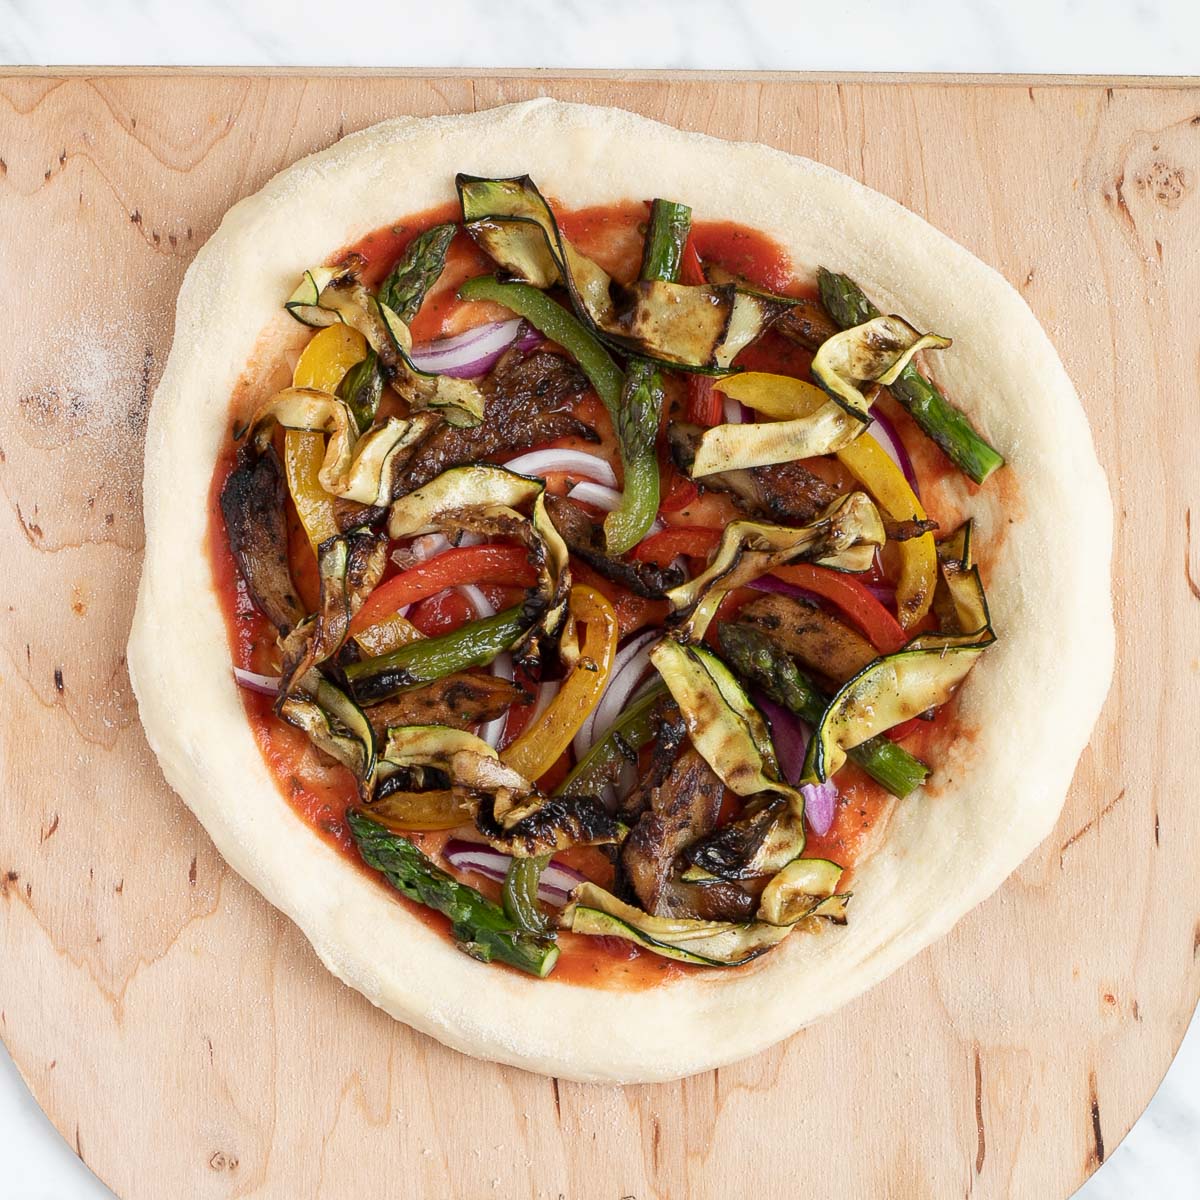 Pizza on a wooden baker's peel topped with tomato sauce, bell pepper strips, zucchini, mushrooms, asparagus, red onion.